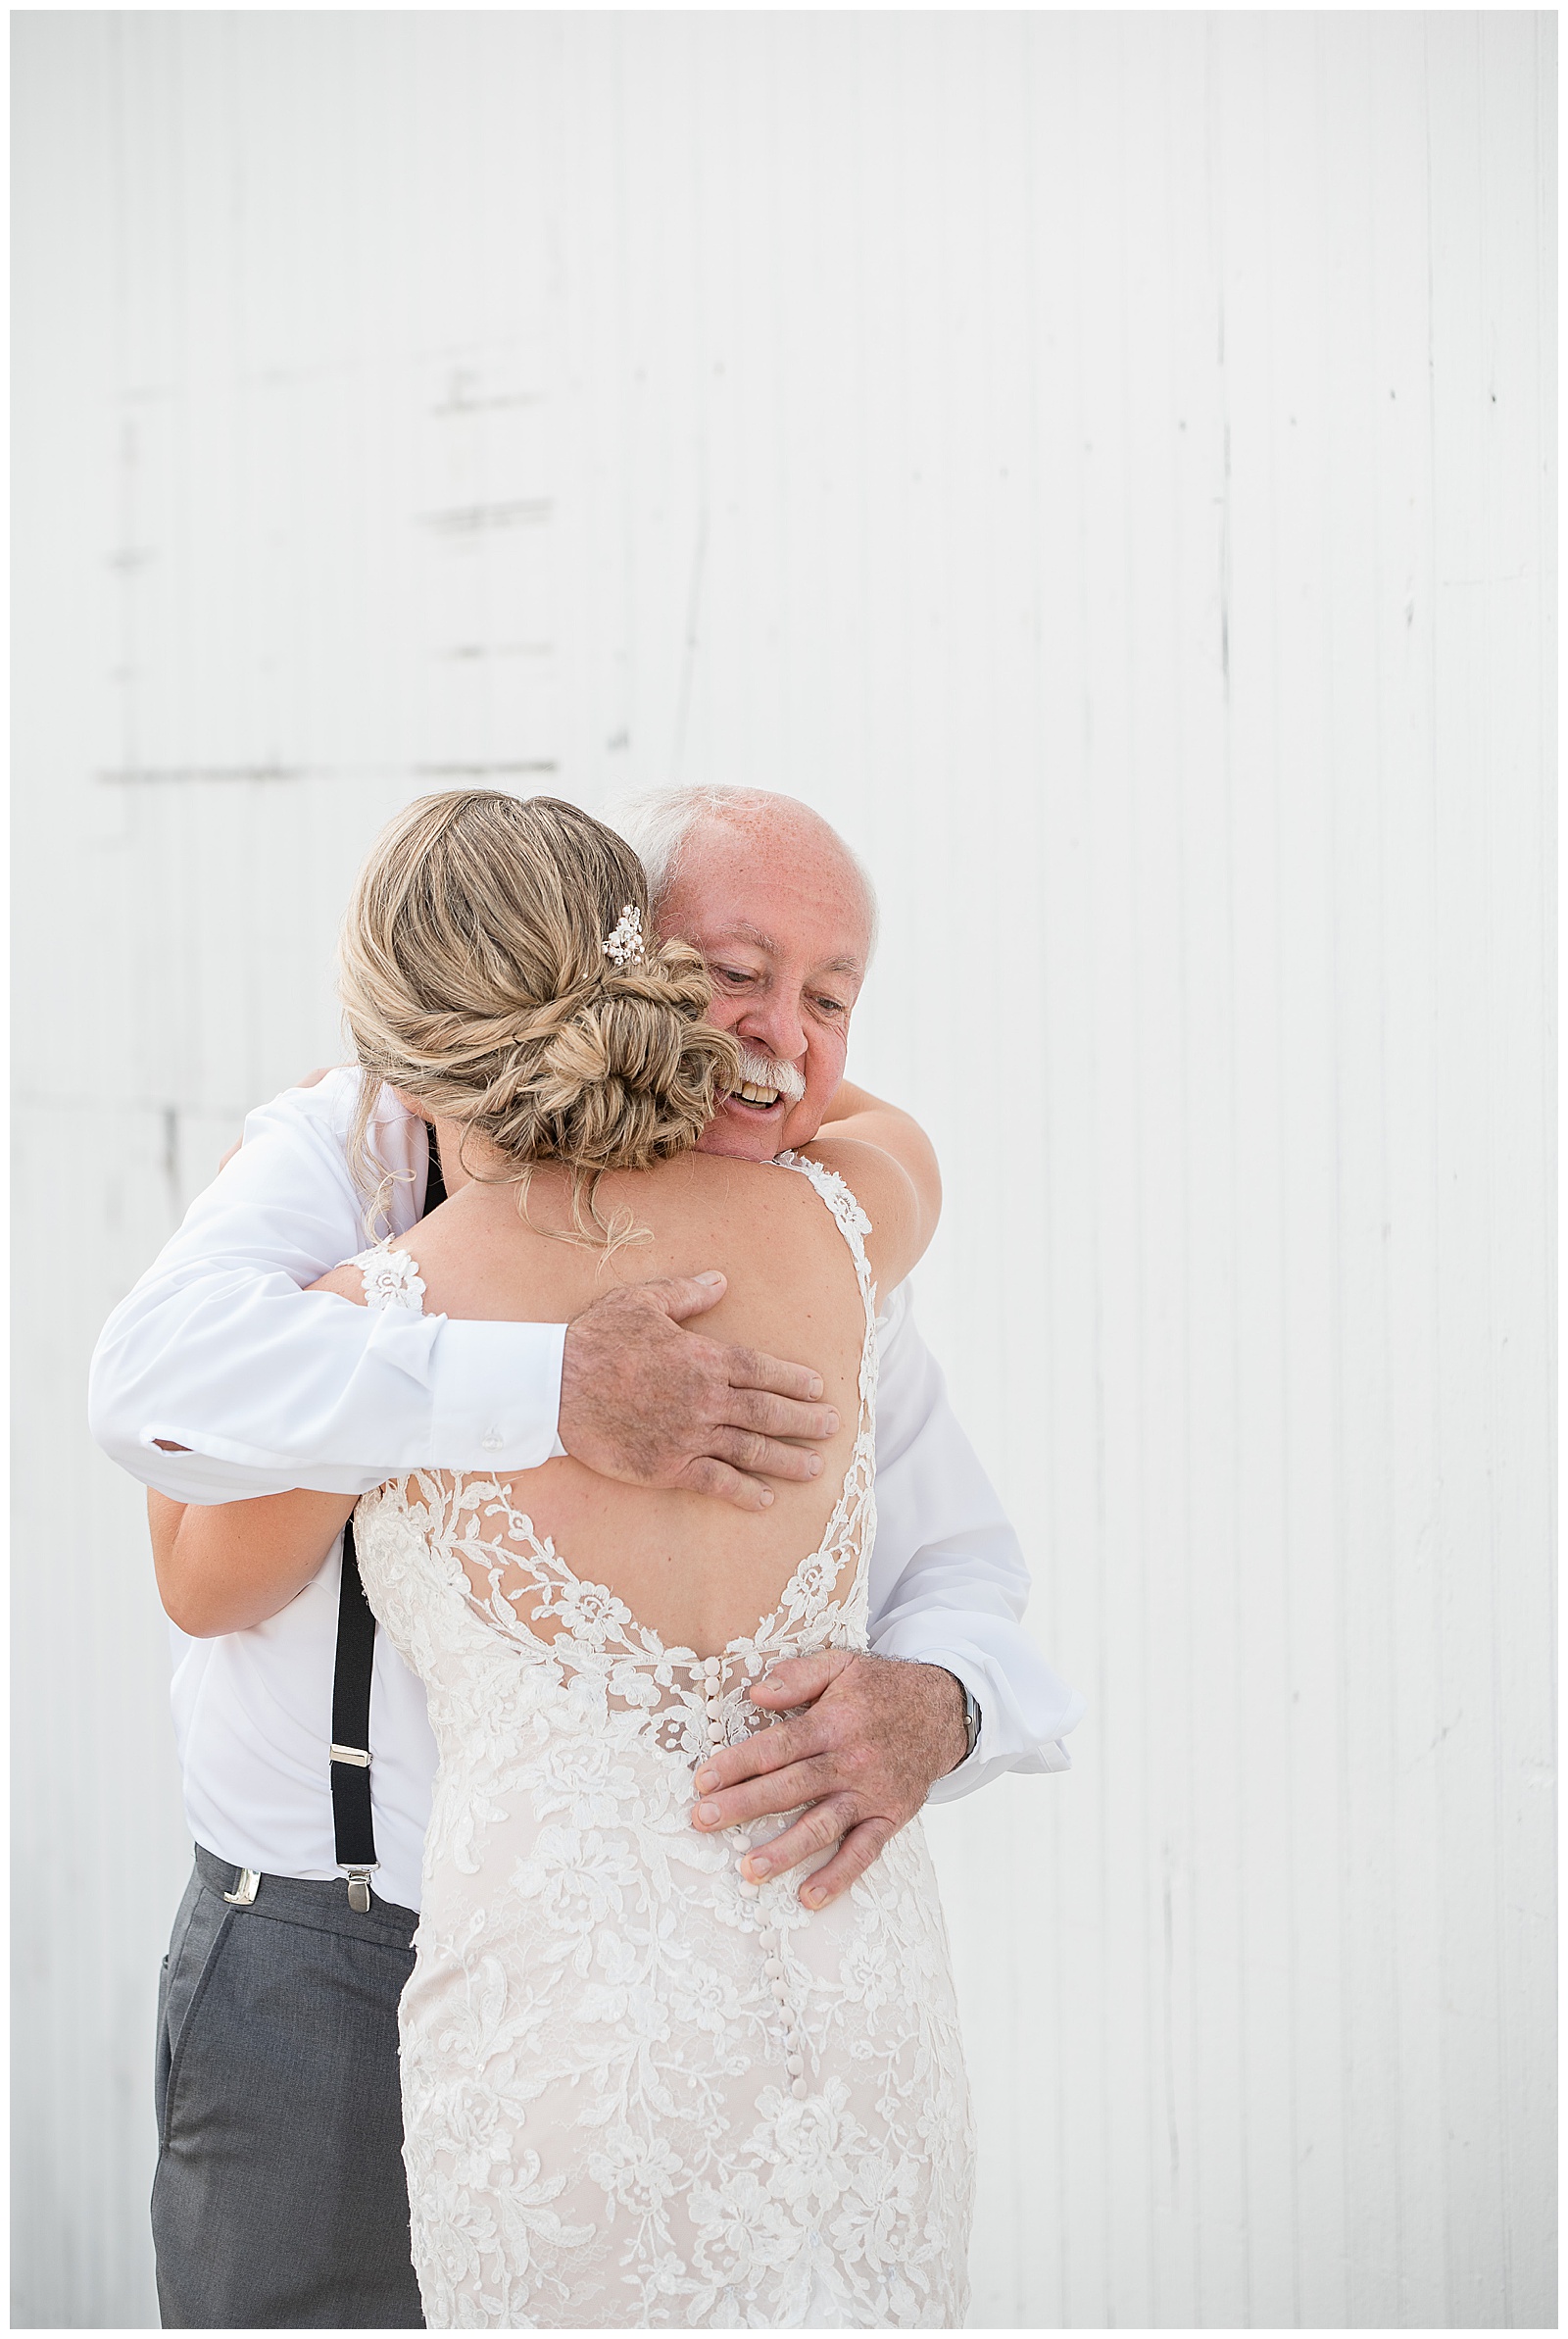 father of the bride smiling and hugging the bride before her wedding day along white barn wall